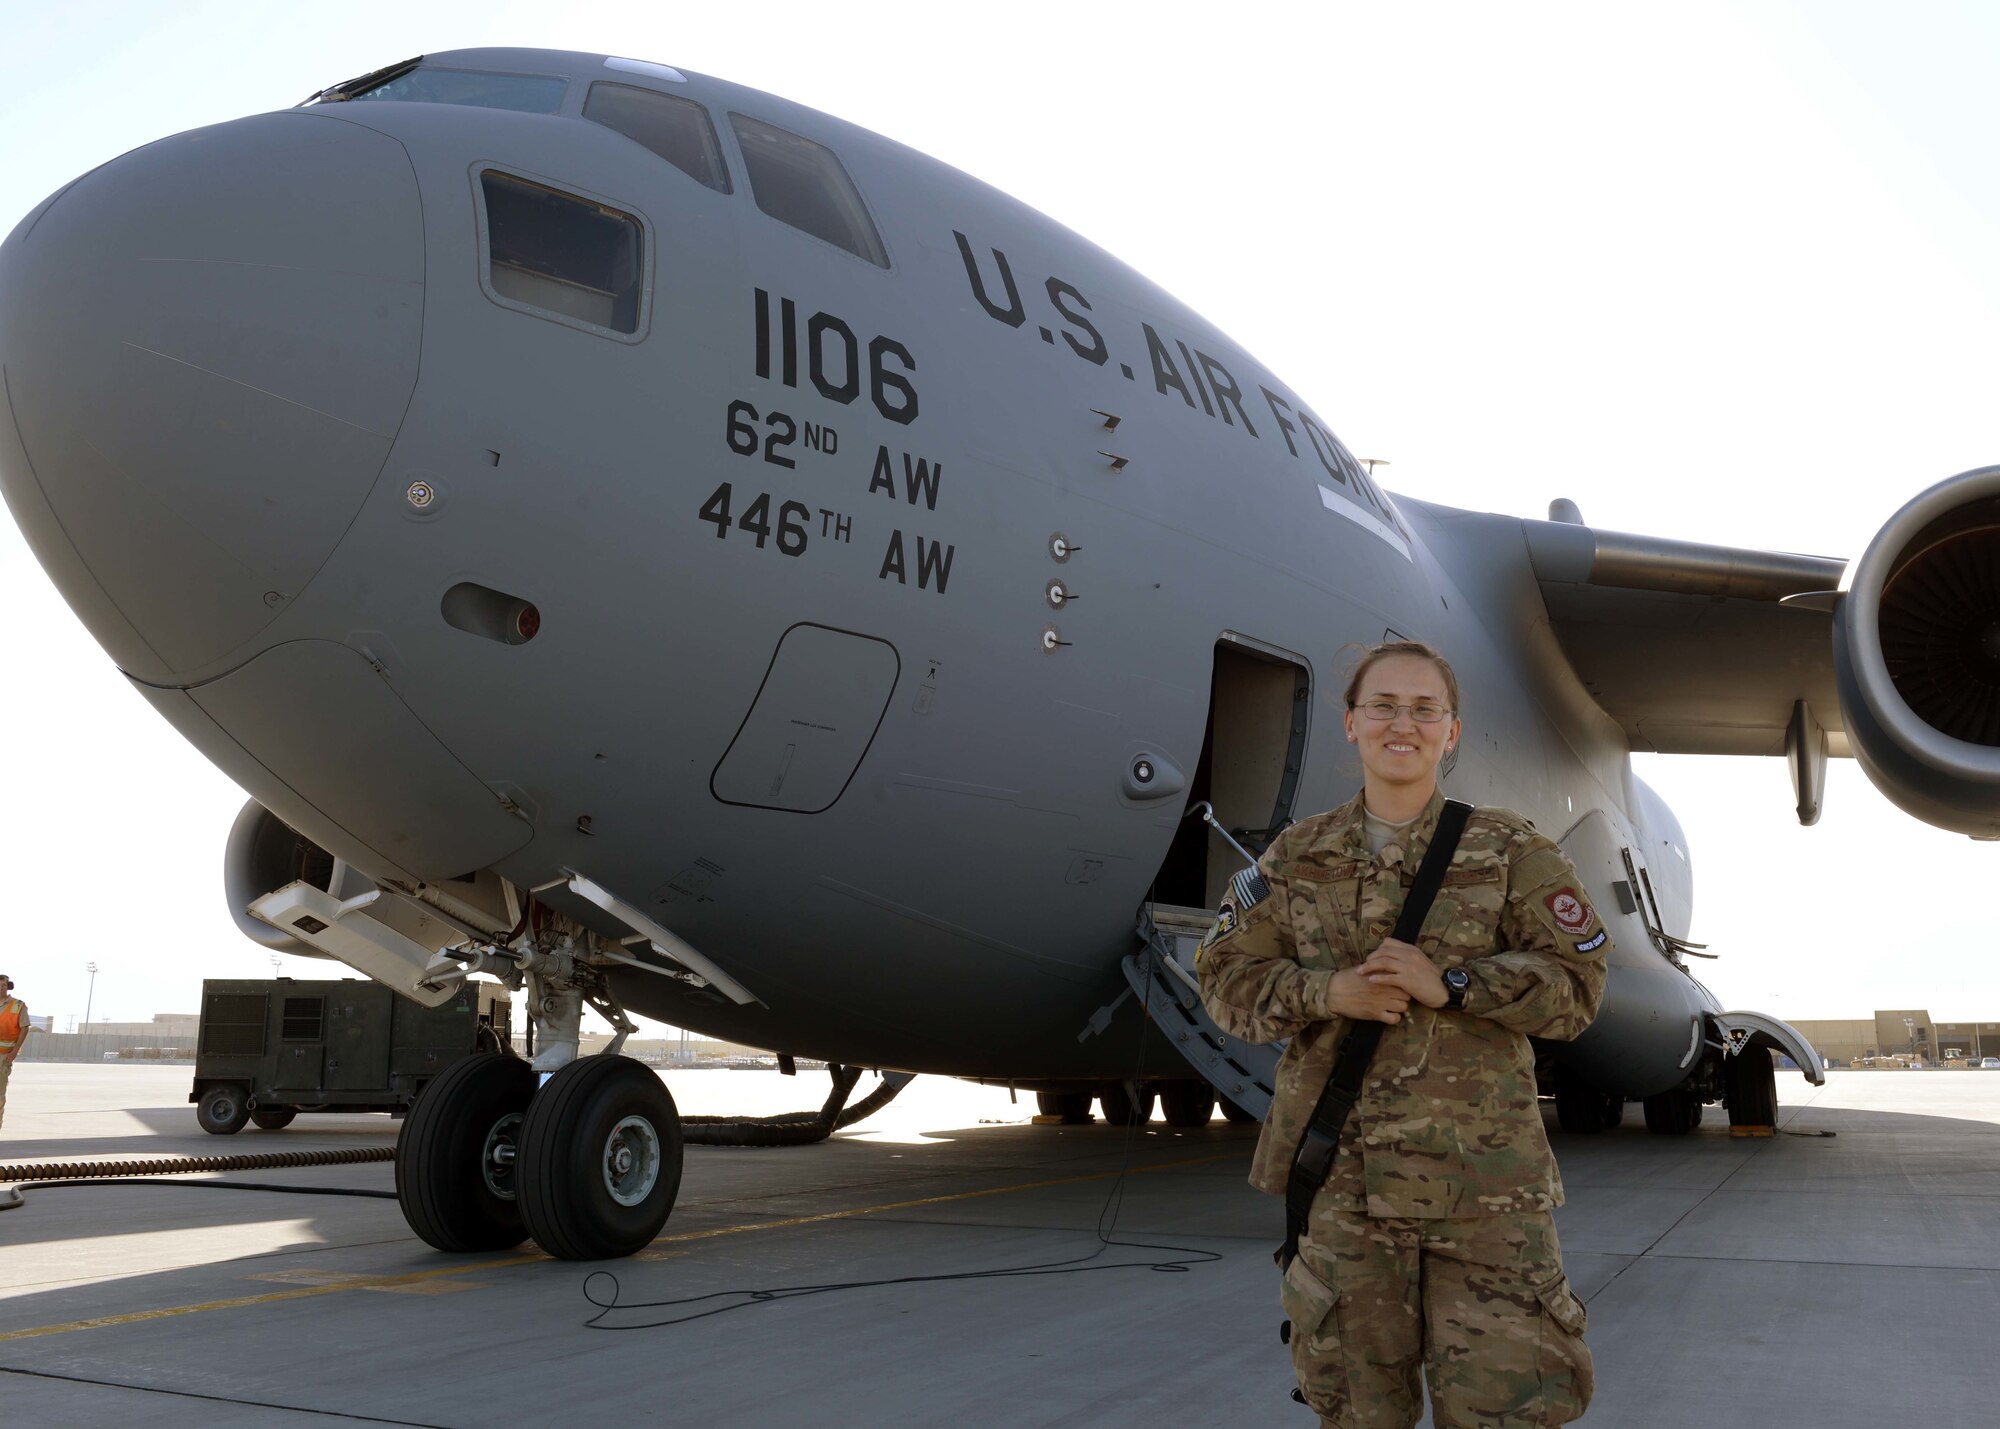 U.S. Air Force Senior Airman Aigerim Akhmetova, Expeditionary Air Mobility Squadron C-17 supply clerk, poses for a photo during her deployment May 20, 2015, at Bagram Air Field, Afghanistan. Akhmetova recently found out she was selected as a candidate to attend Officer Training School at Maxwell Air Force Base, Ala., in 2016. (U.S. Air Force photo by Senior Airman Cierra Presentado/Released)